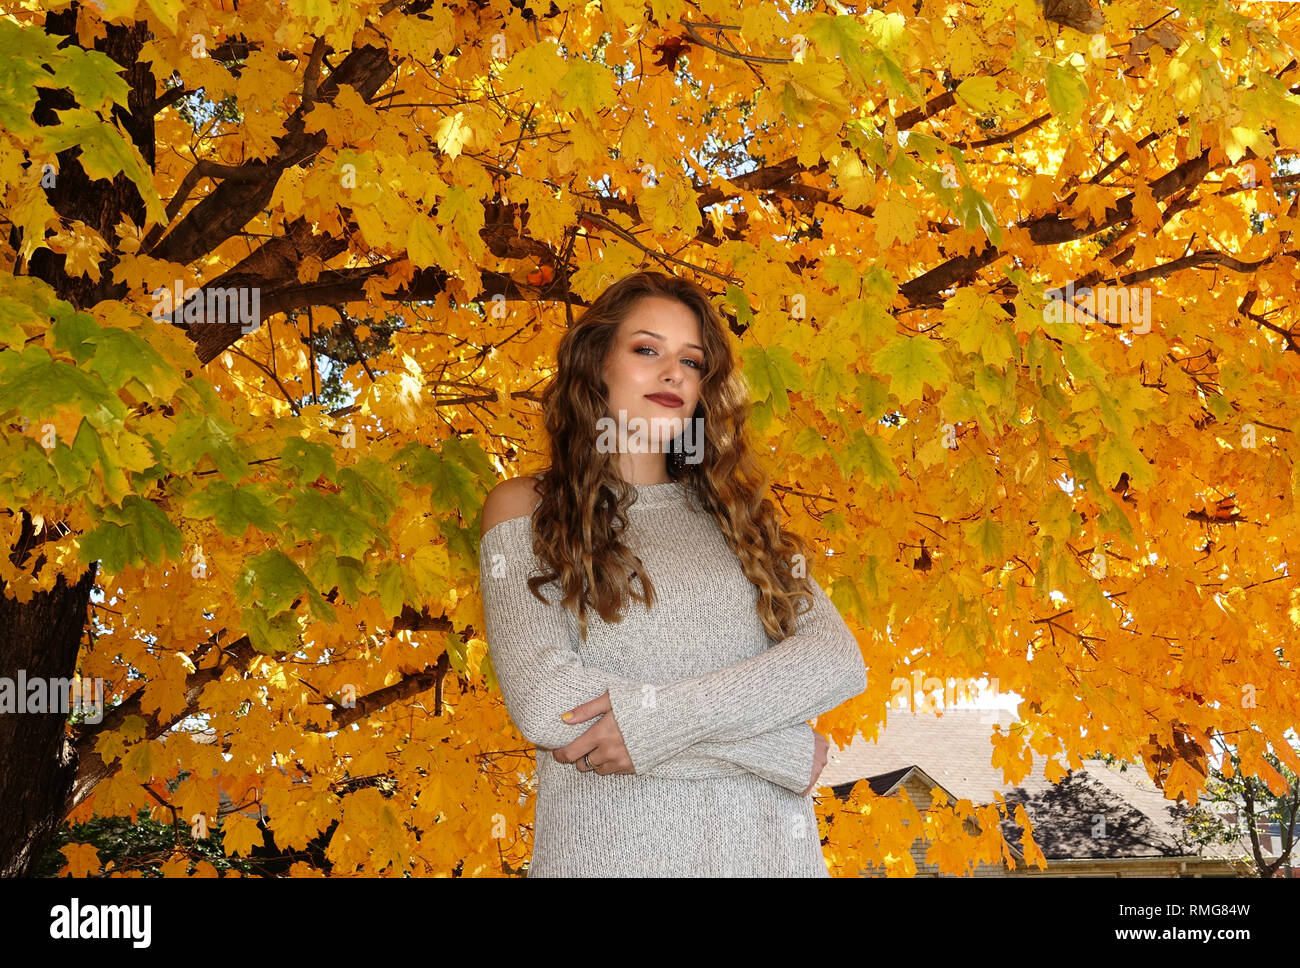 Beautiful country girl in a Fall country setting Stock Photo